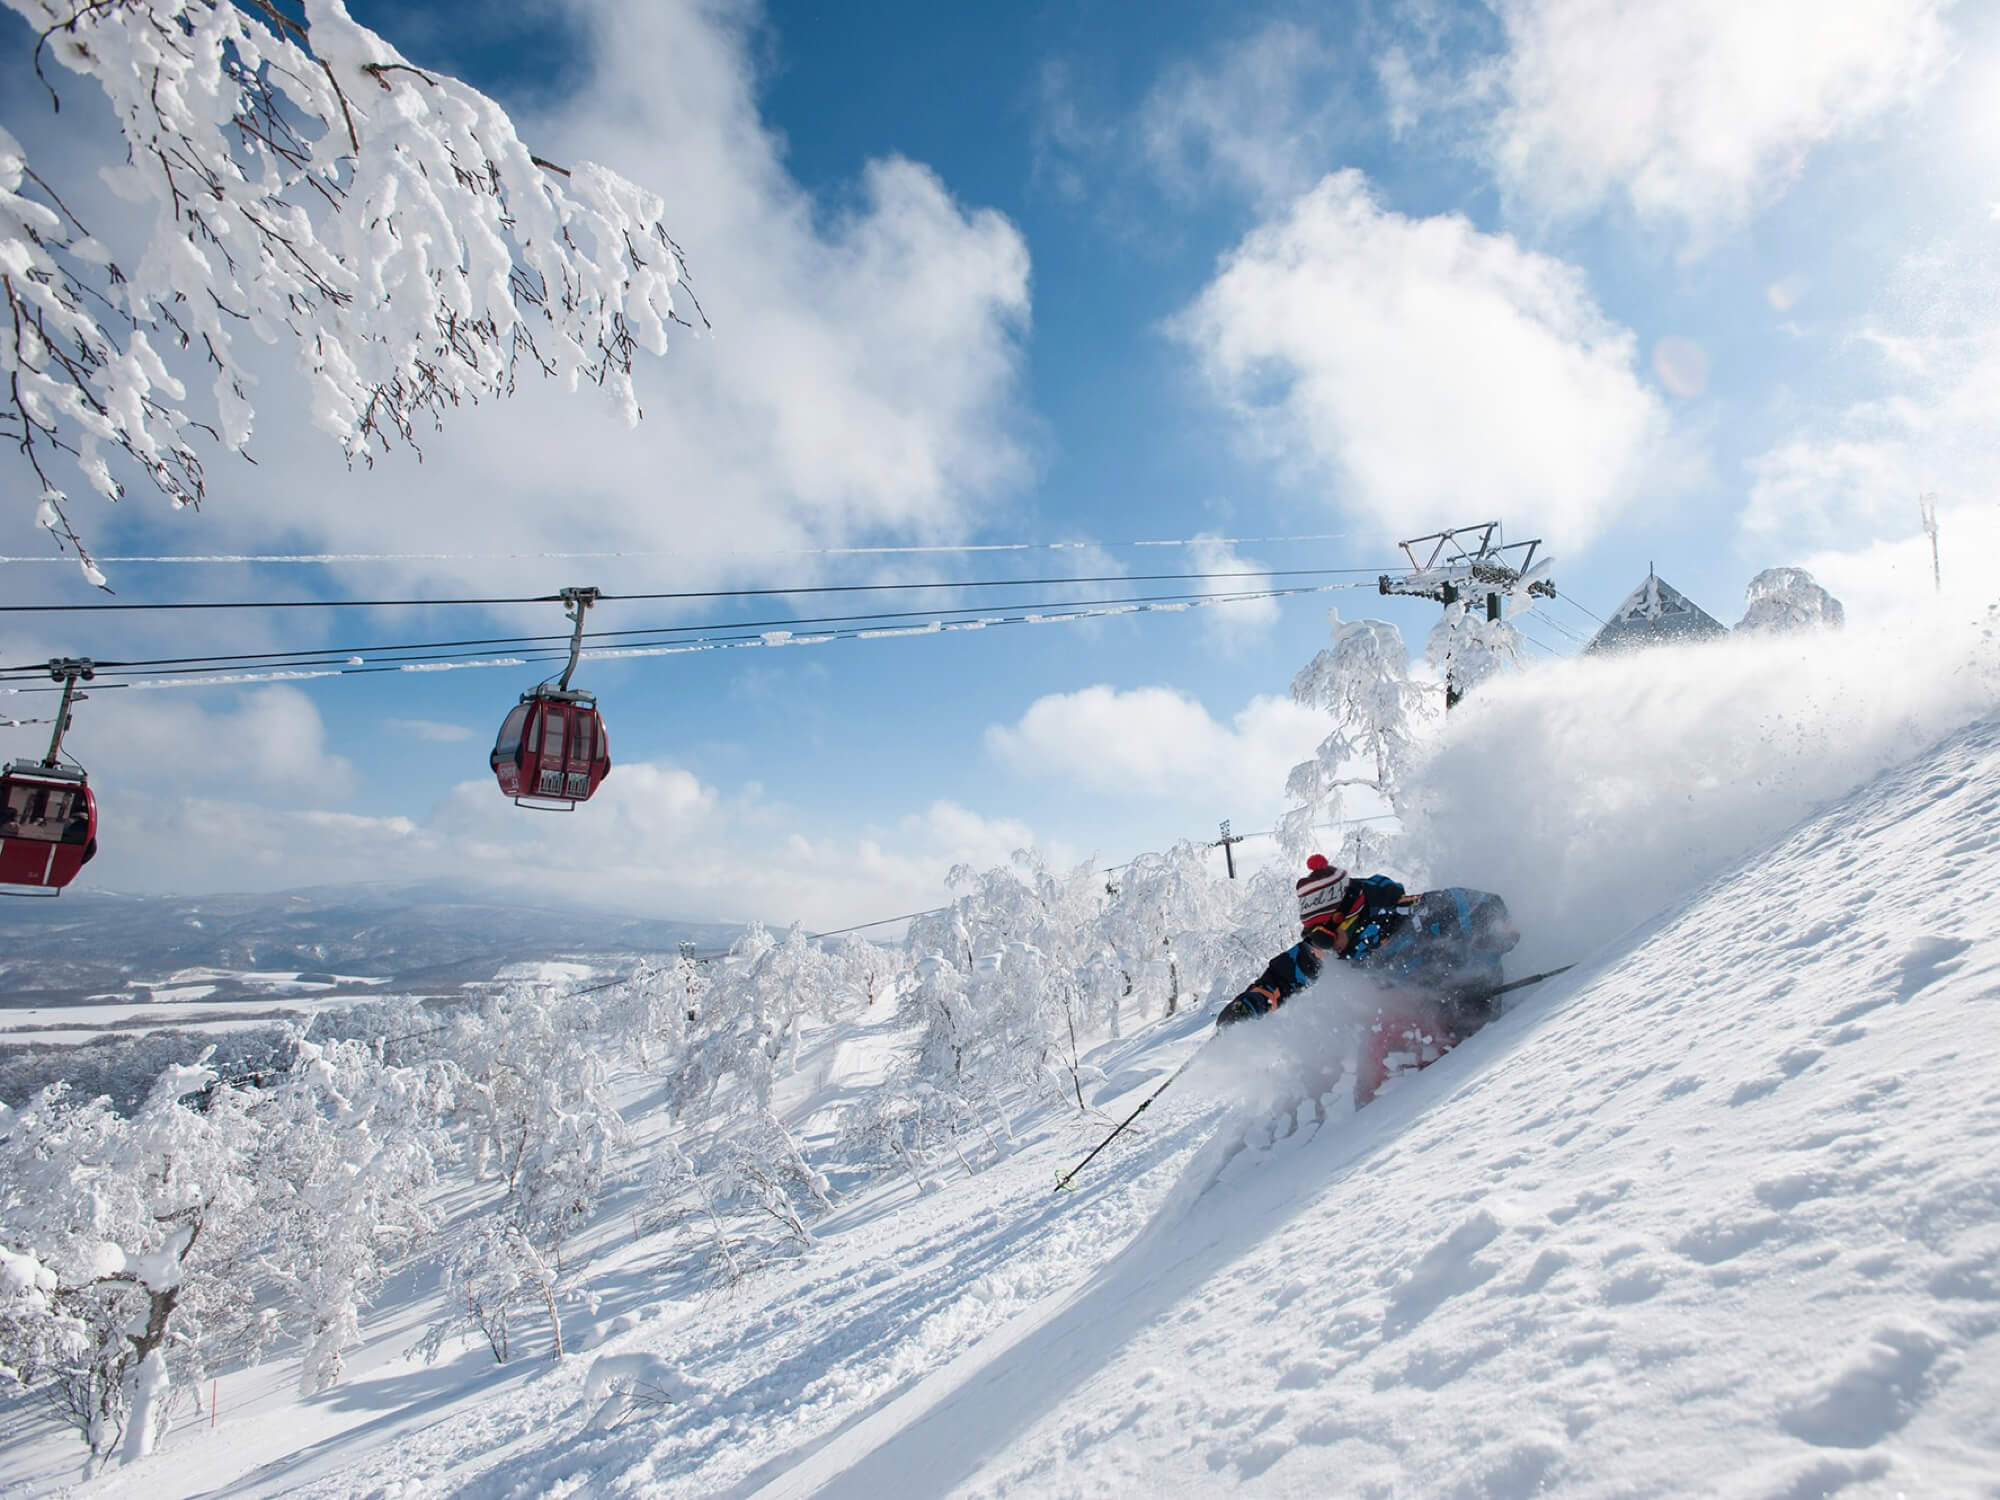 Ski Bliss Awaits: Hotel＆ Ski Package: Stay 3 Nights at Sapporo, Ski Bus, and Lift Ticket Included! image